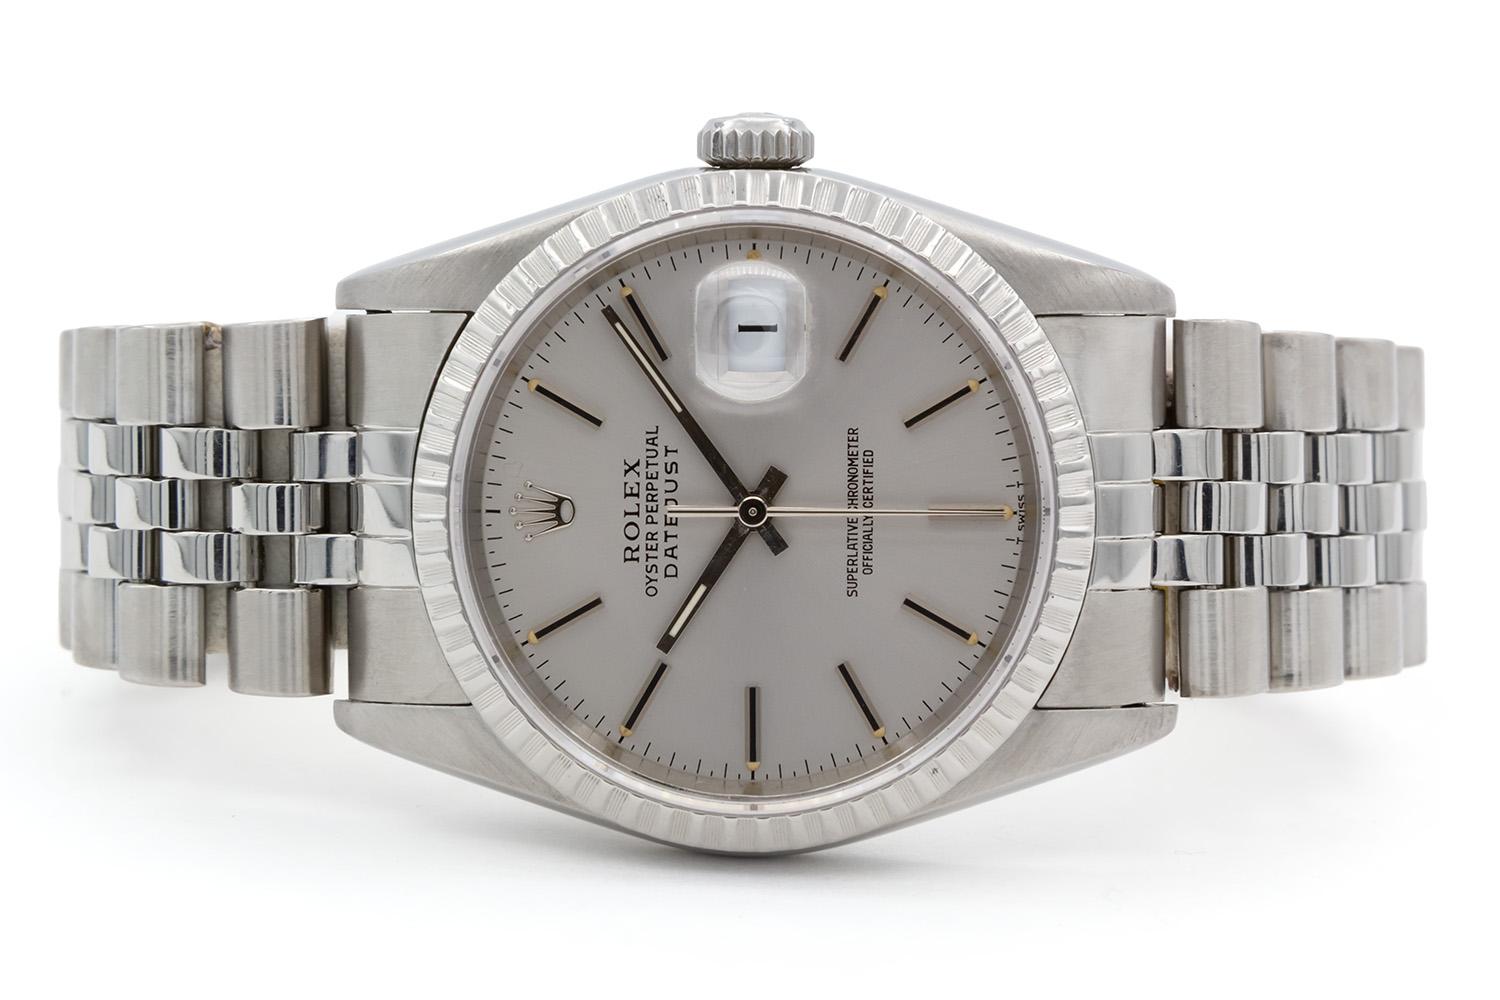 We are pleased to offer this 1995 Rolex Datejust 16220. This is a great Rolex for a man or a woman especially with women wearing larger watches these days. It features a 36mm stainless steel case and jubilee bracelet, silver stick dial and stainless